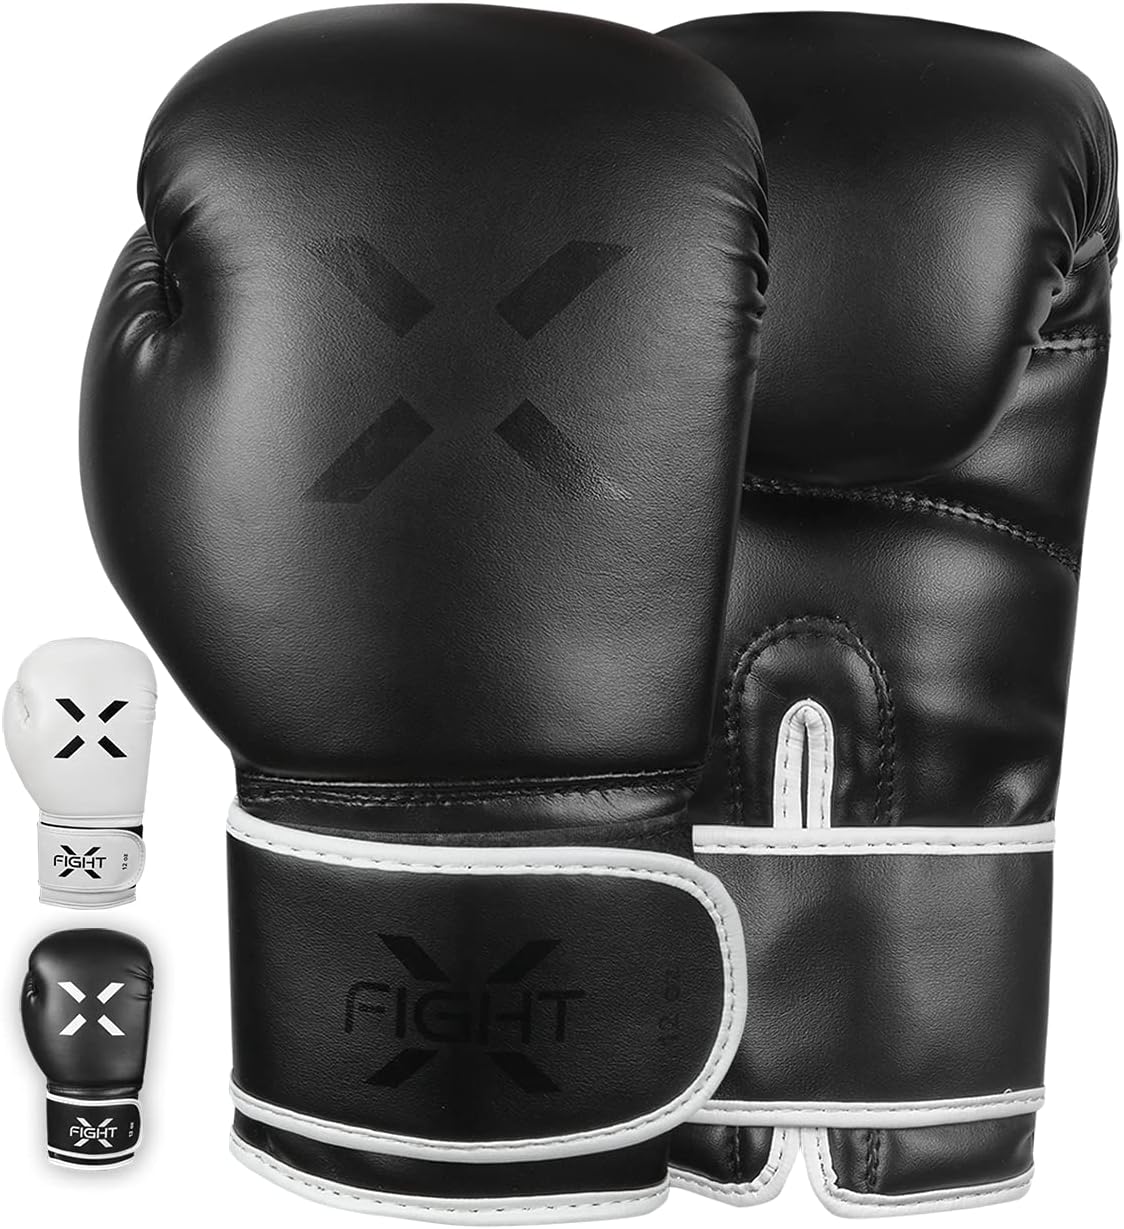 WINMAN Boxing Gloves MMA Focus pads & Mitts Hook and Jab Kick Punching Training 